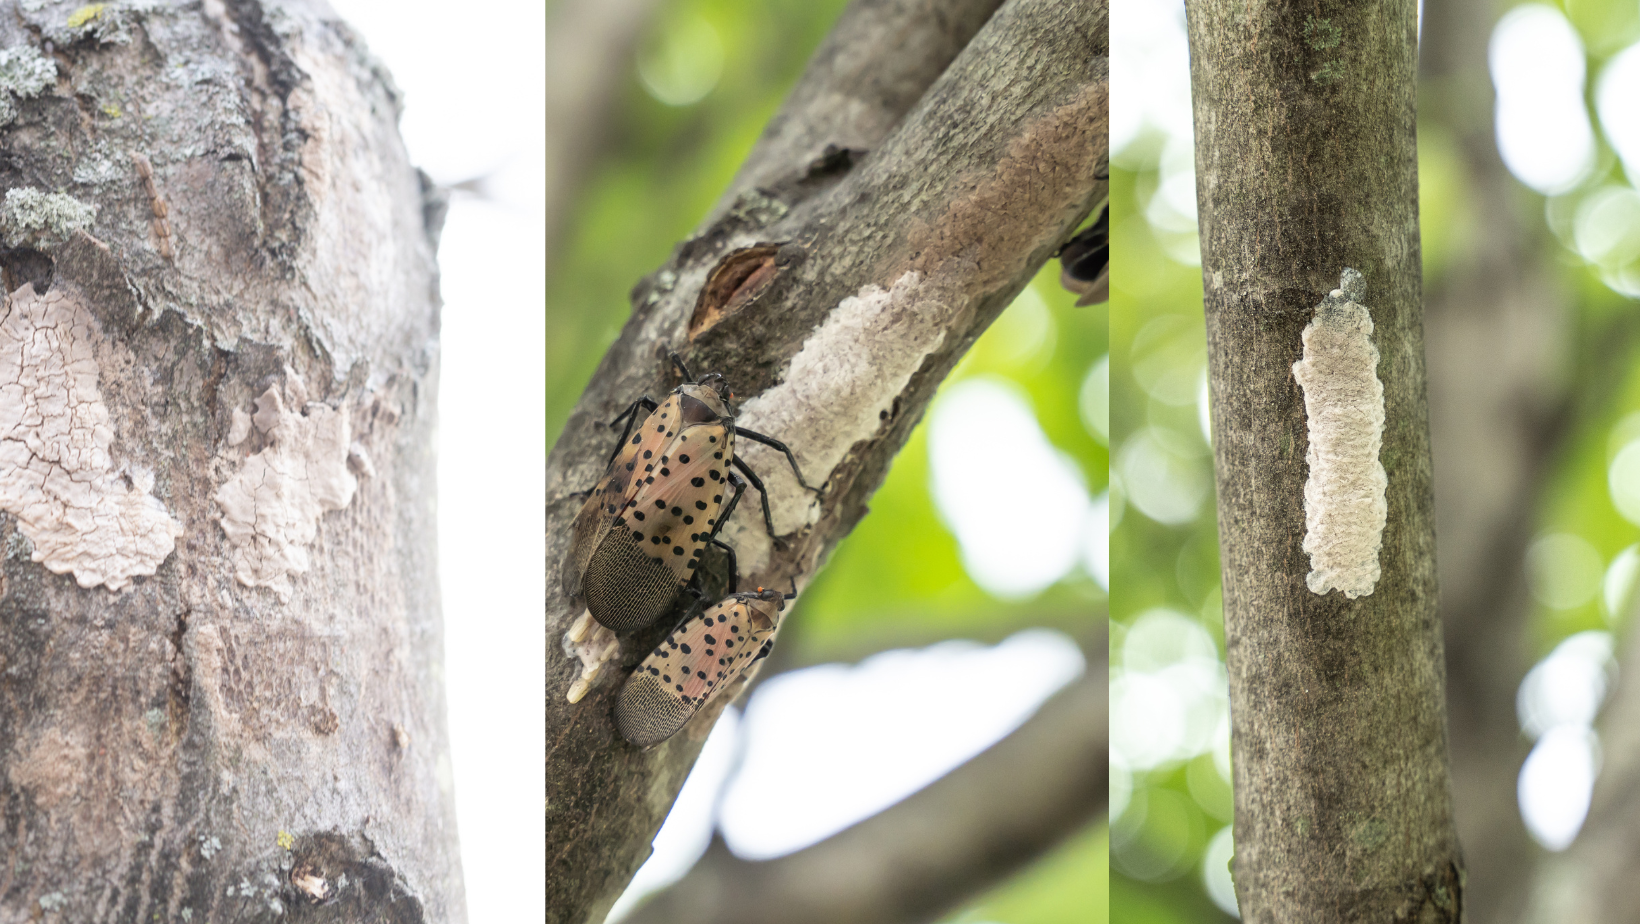 How to find spotted lanternfly eggs